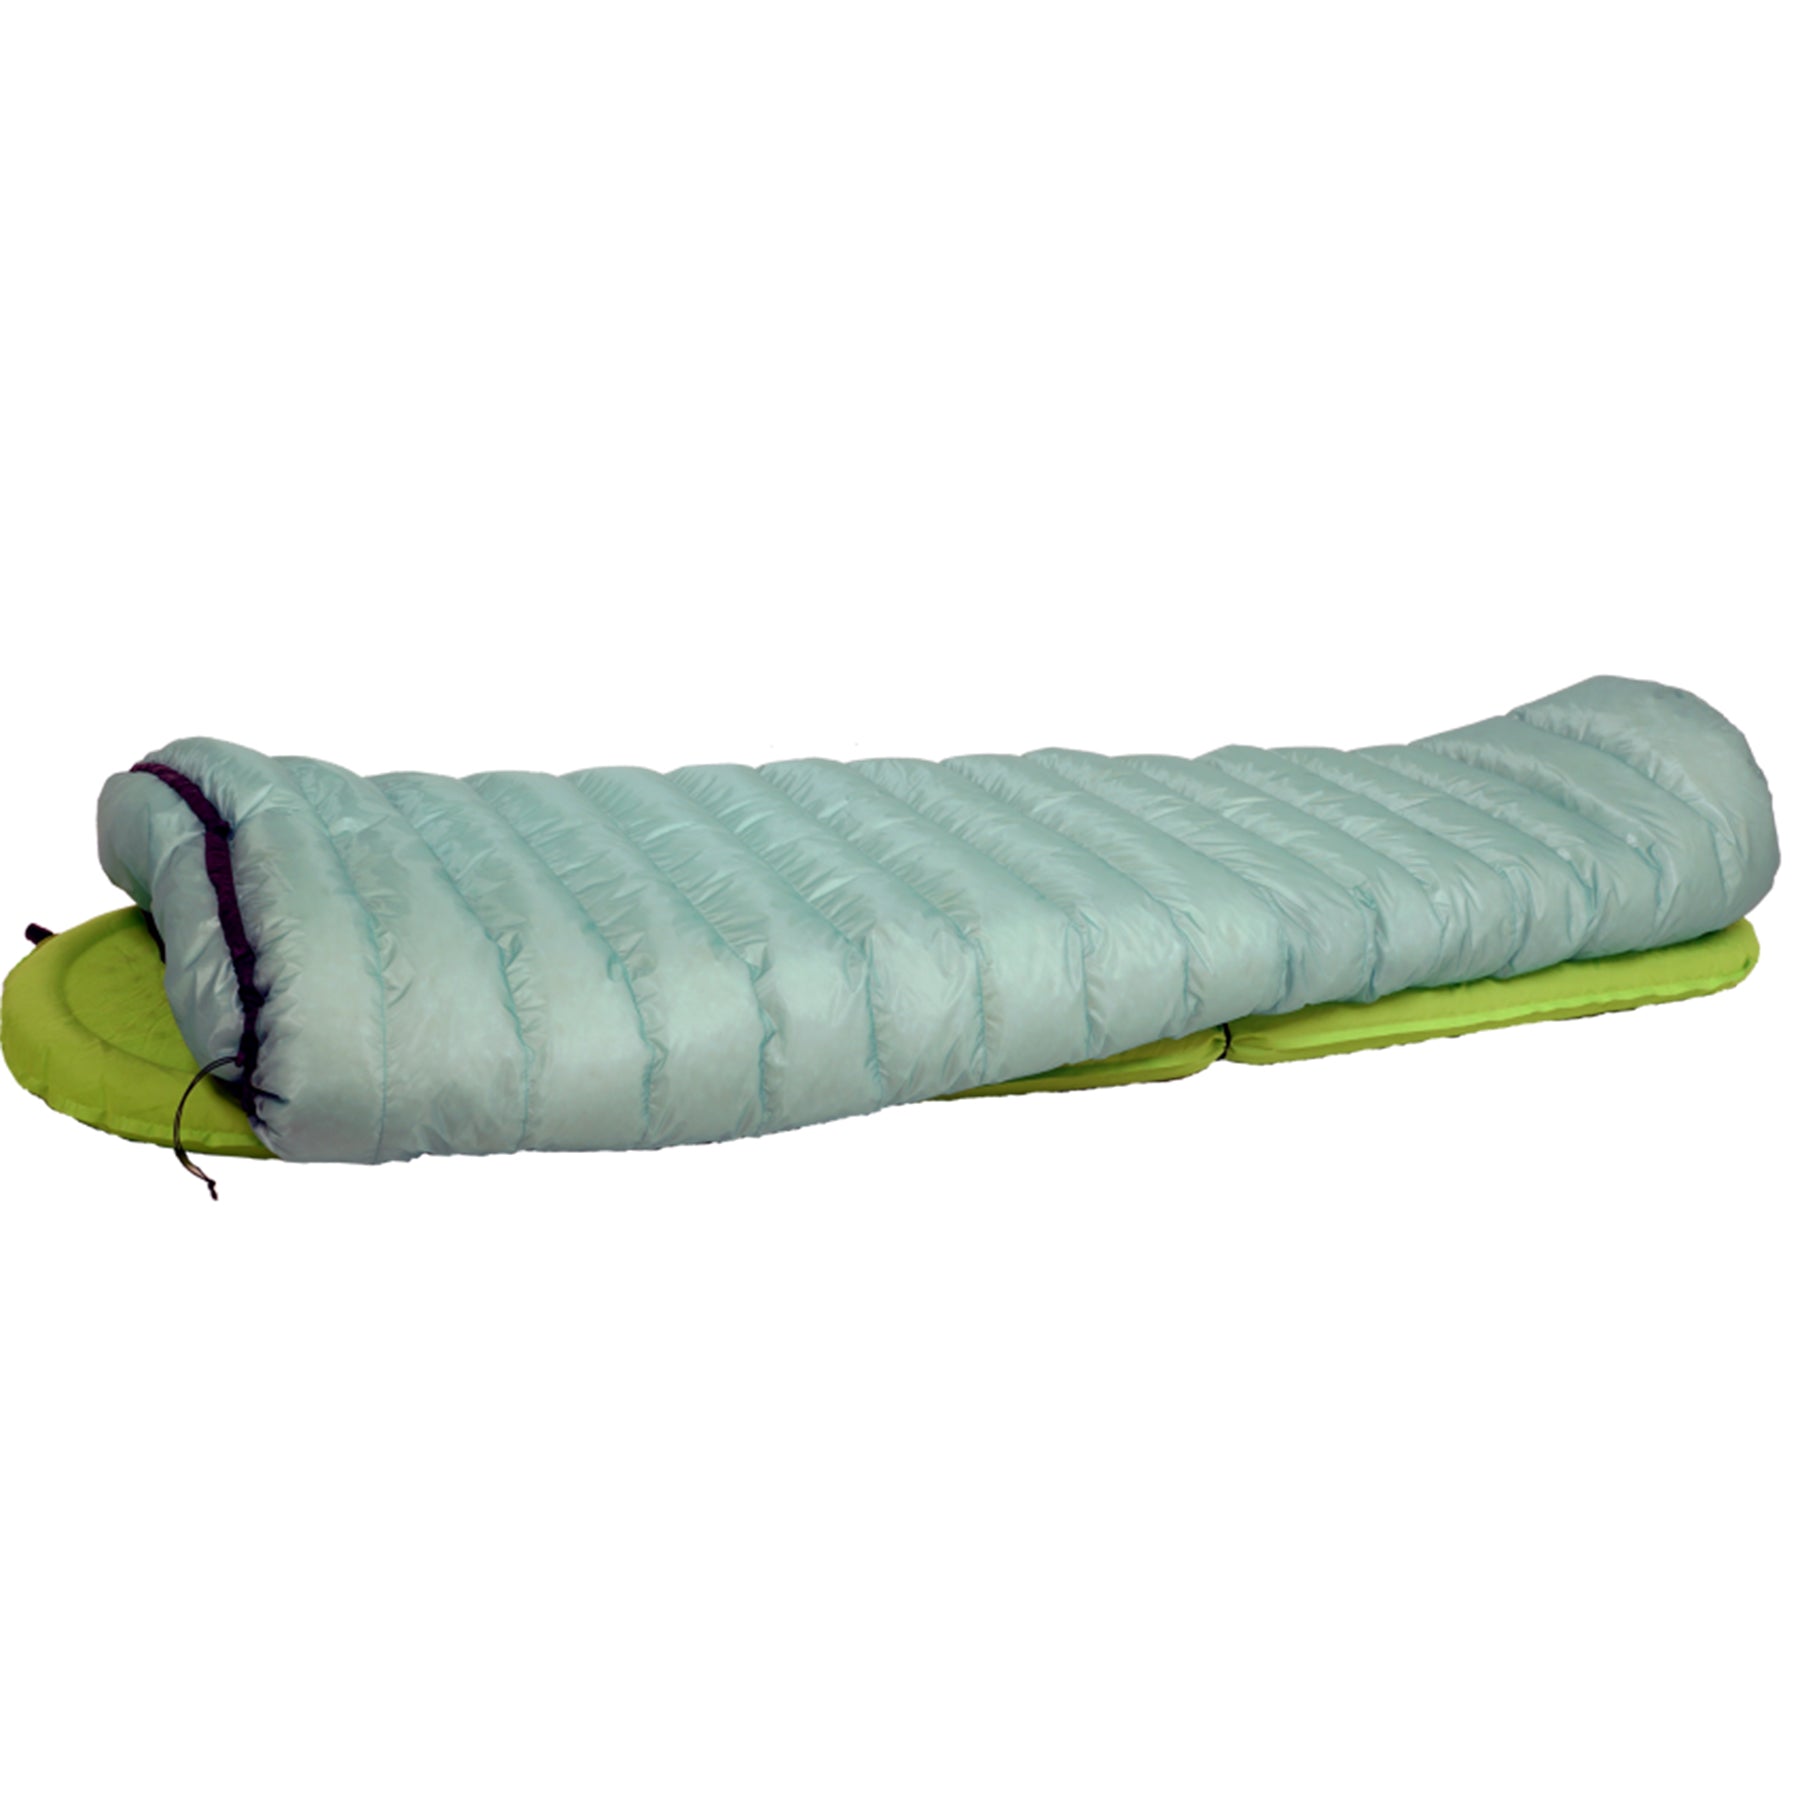 ASTRALITE SLEEPING BAG ATTACHED TO A SLEEPING PAD